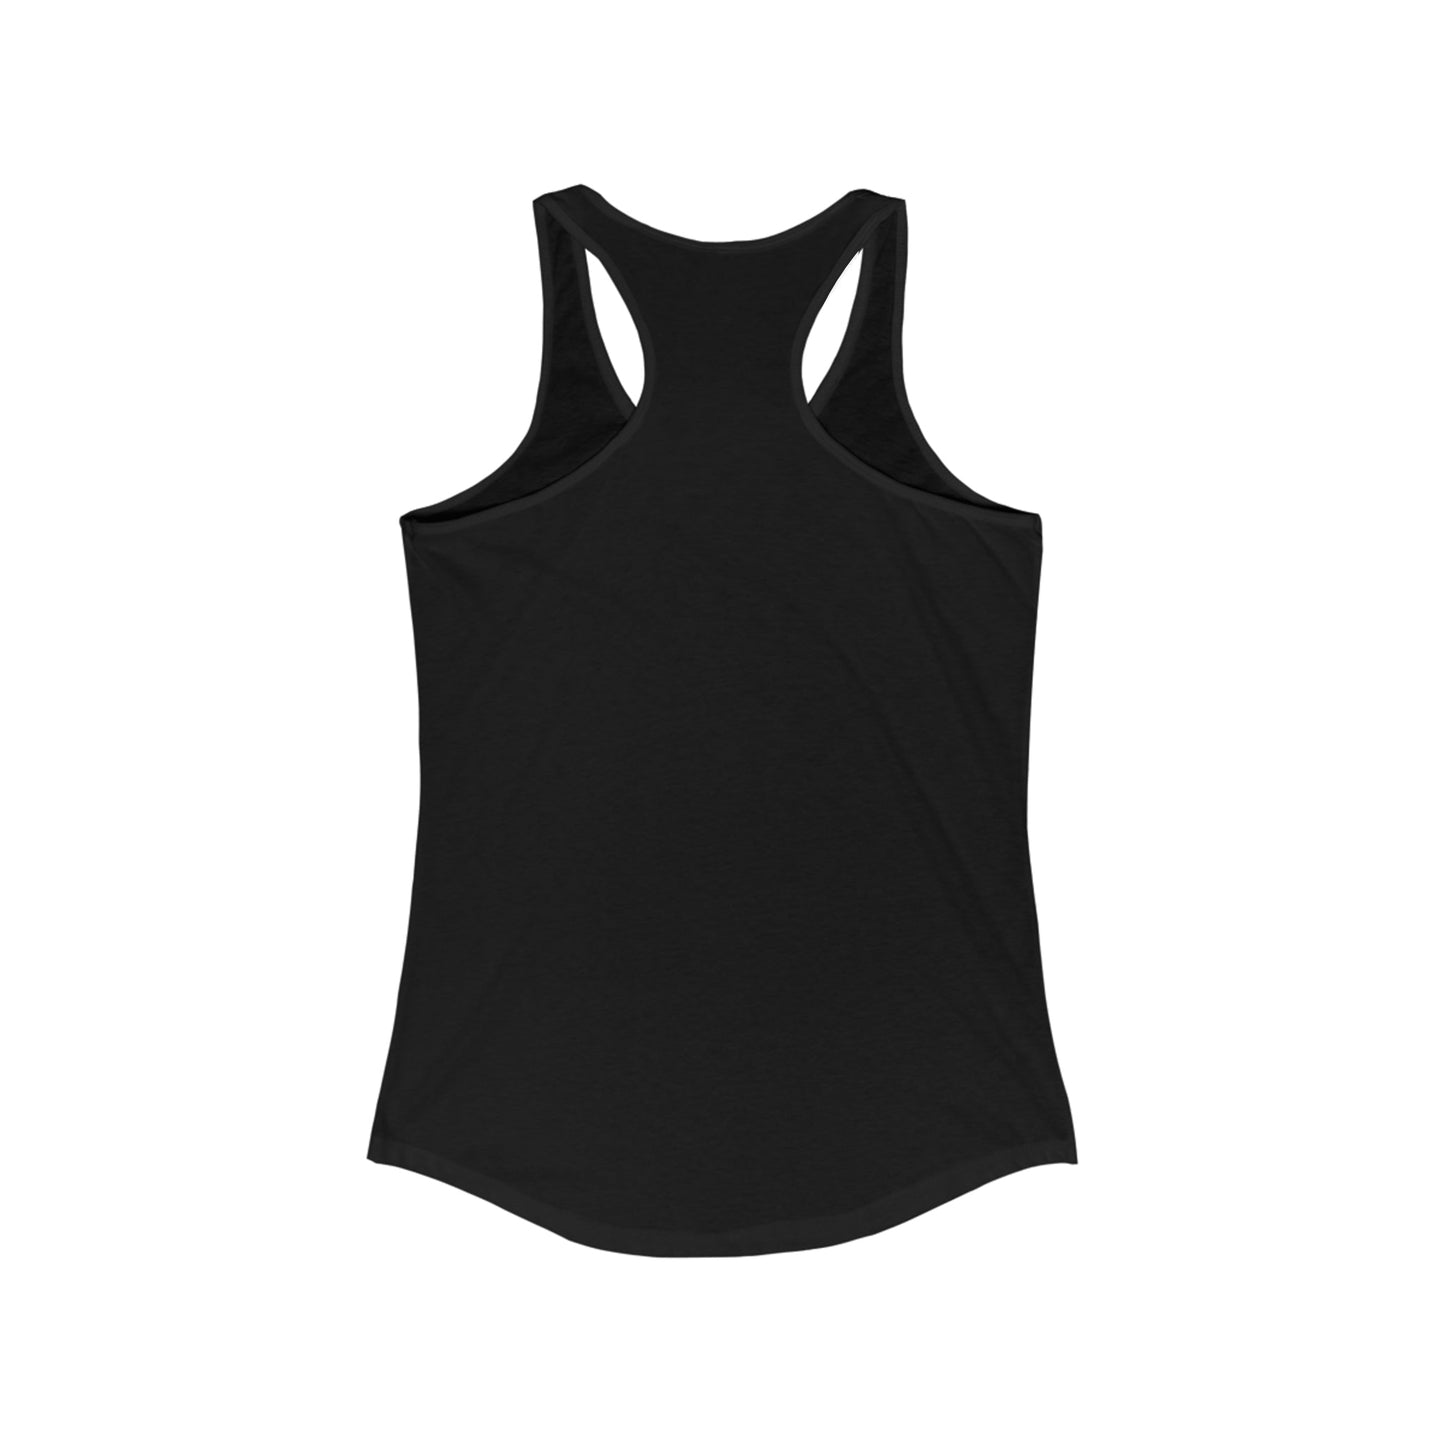 Completely Ignoring You | Women’s Ideal Racerback Tank